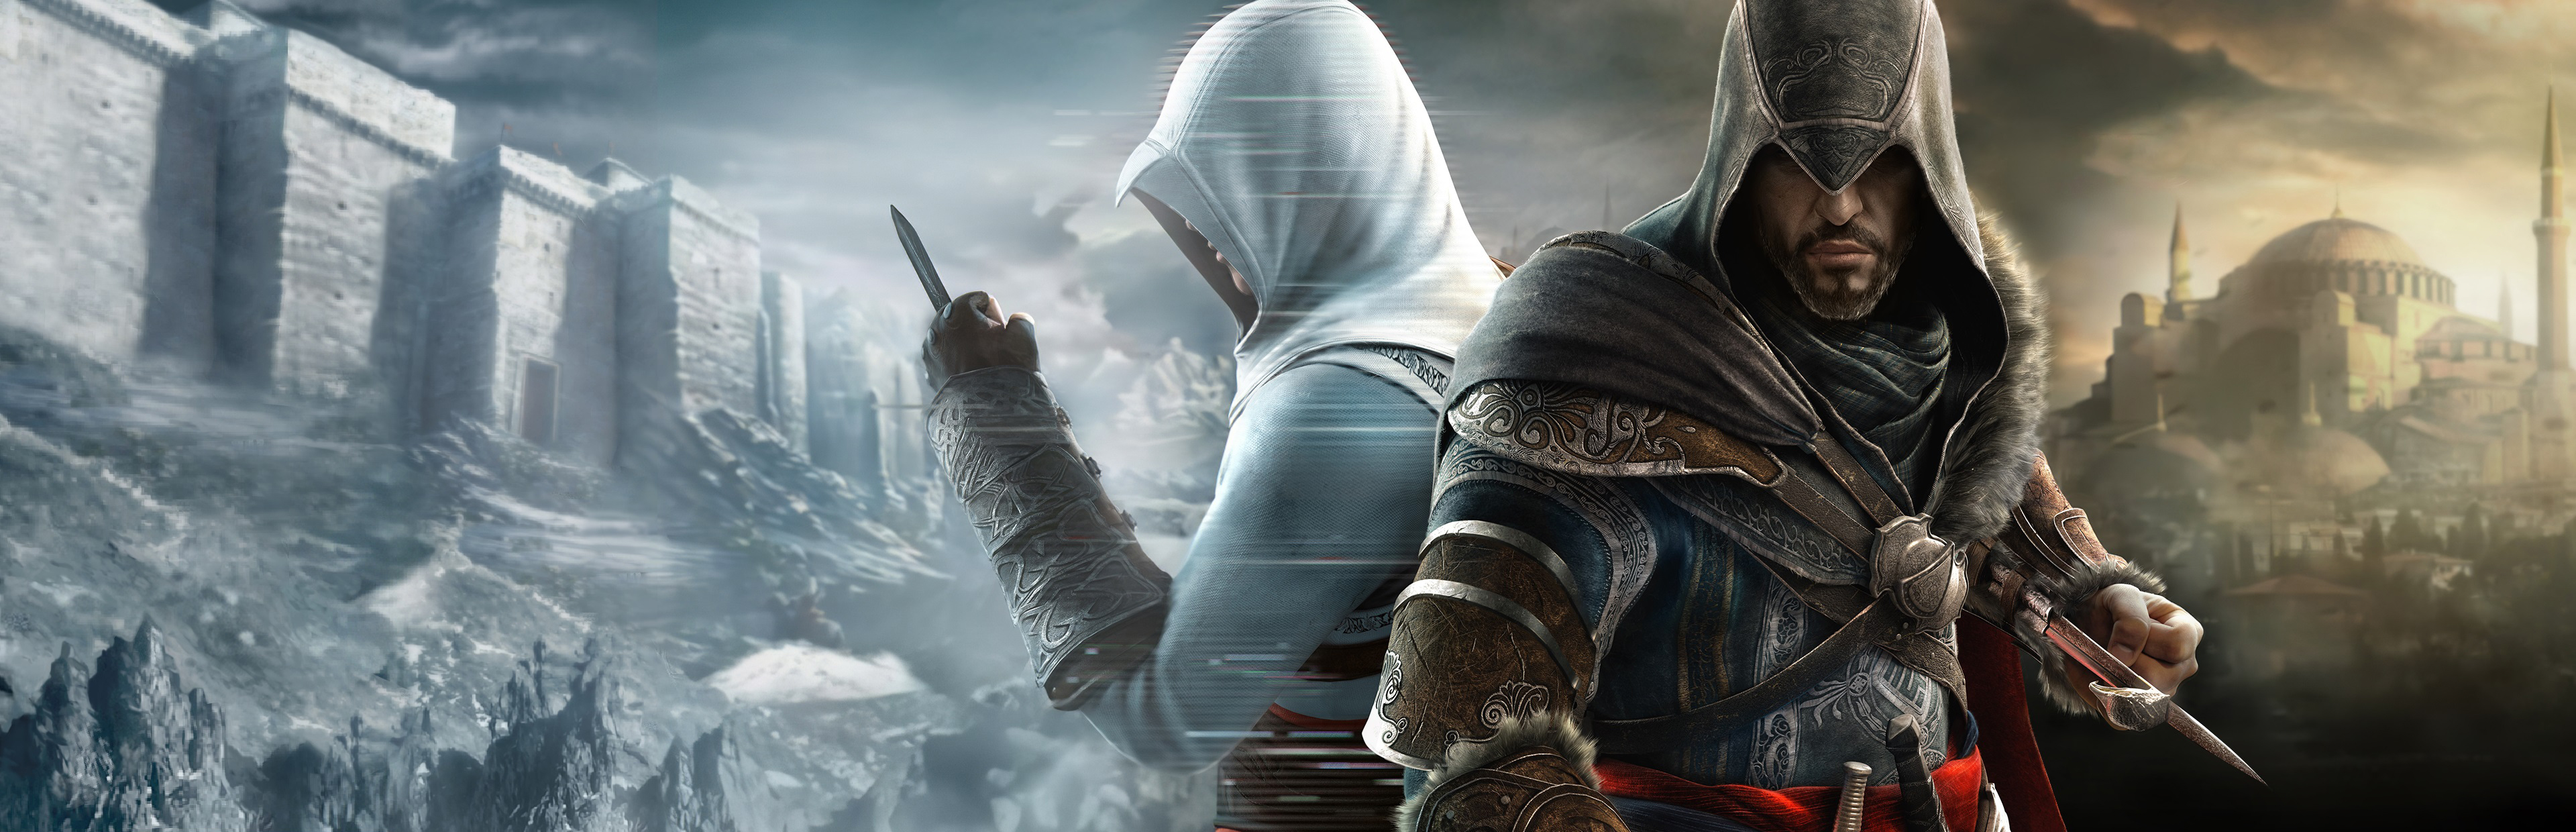 Assassin S Creed Revelations Steamgriddb